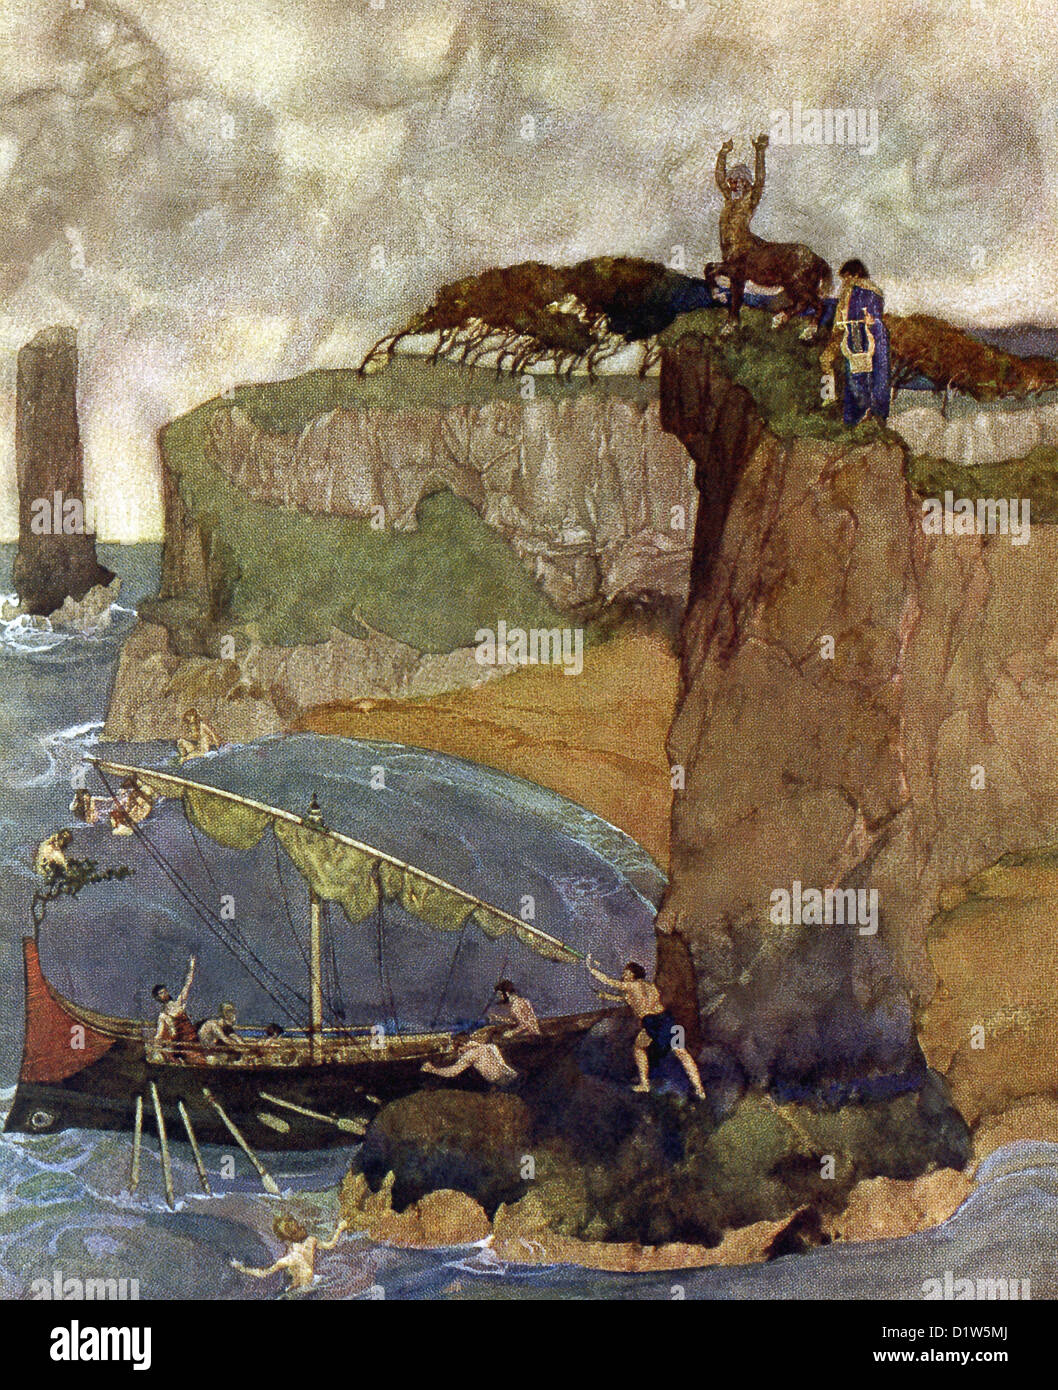 Chiron stands at the top of a cliff with Achilles holding a lyre. Below the Argonauts are preparing to leave for Colchis. Stock Photo